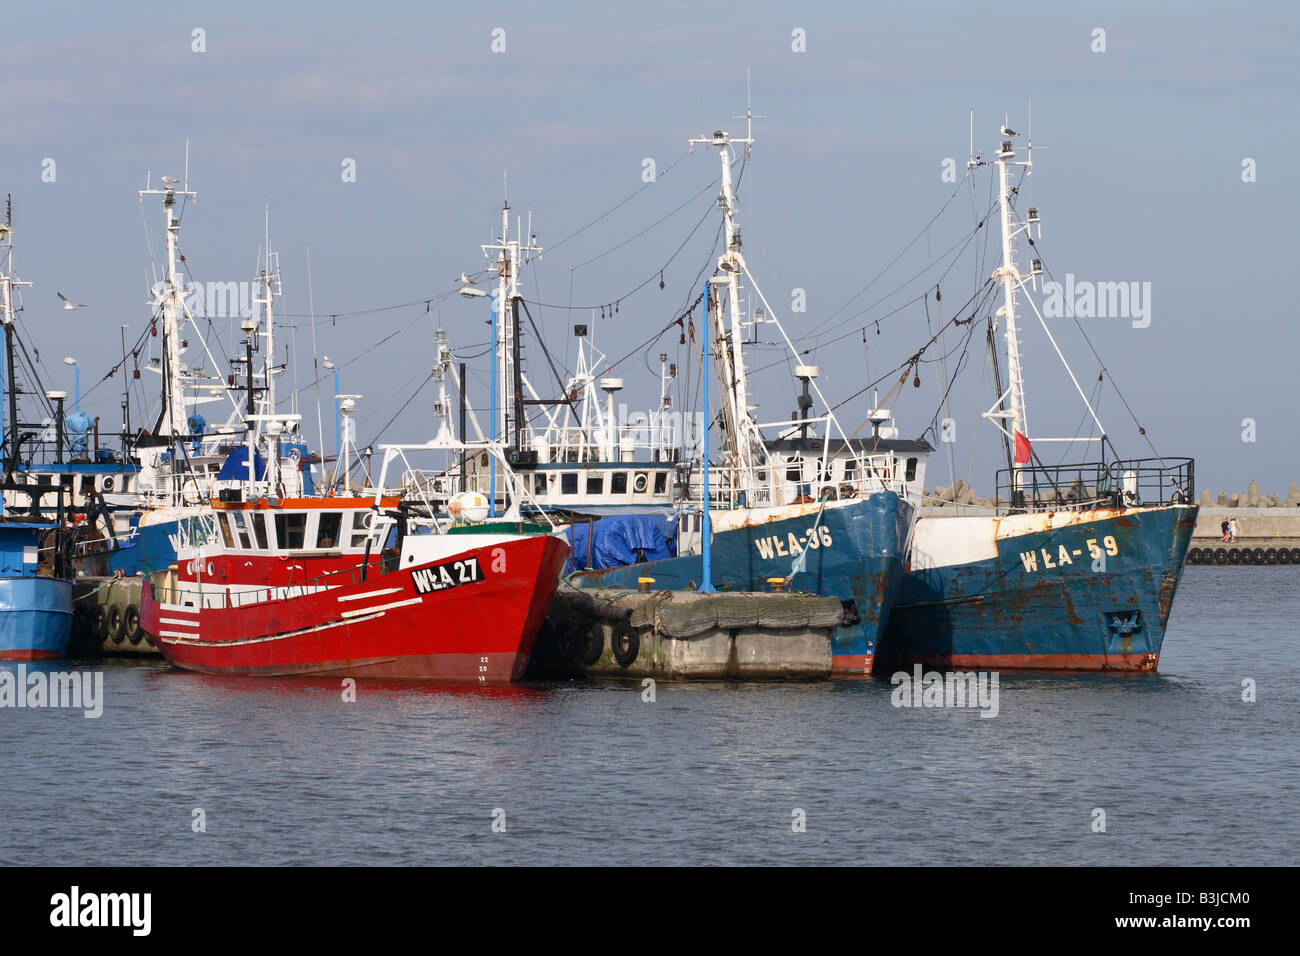 Wladyslawowo Poland busy port harbour scene with fishing vessel boats moored at this Baltic Sea town Stock Photo